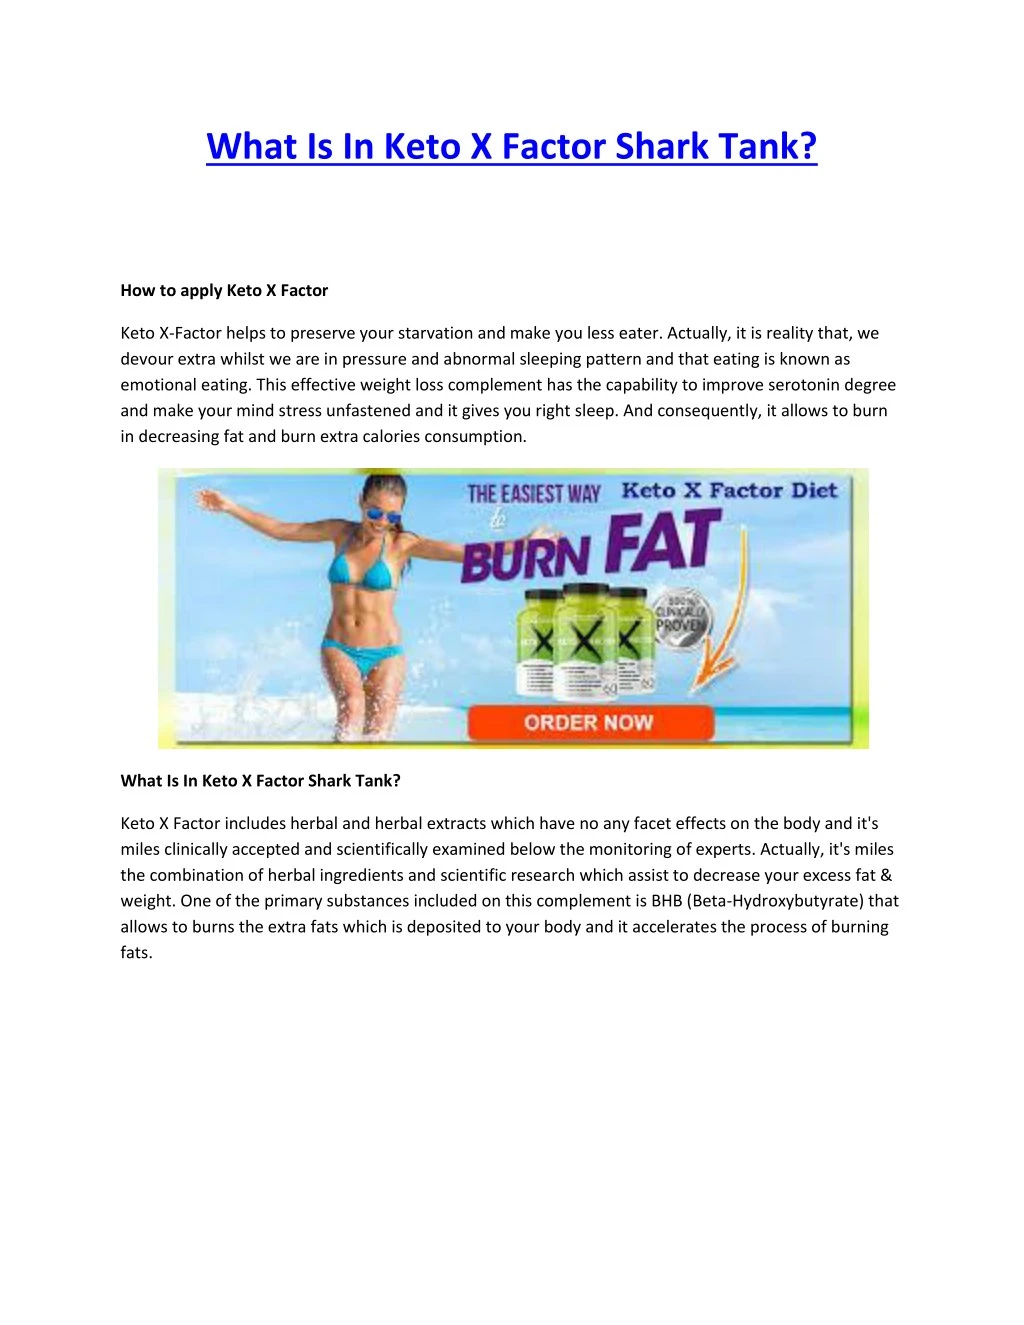 what is in keto x factor shark tank